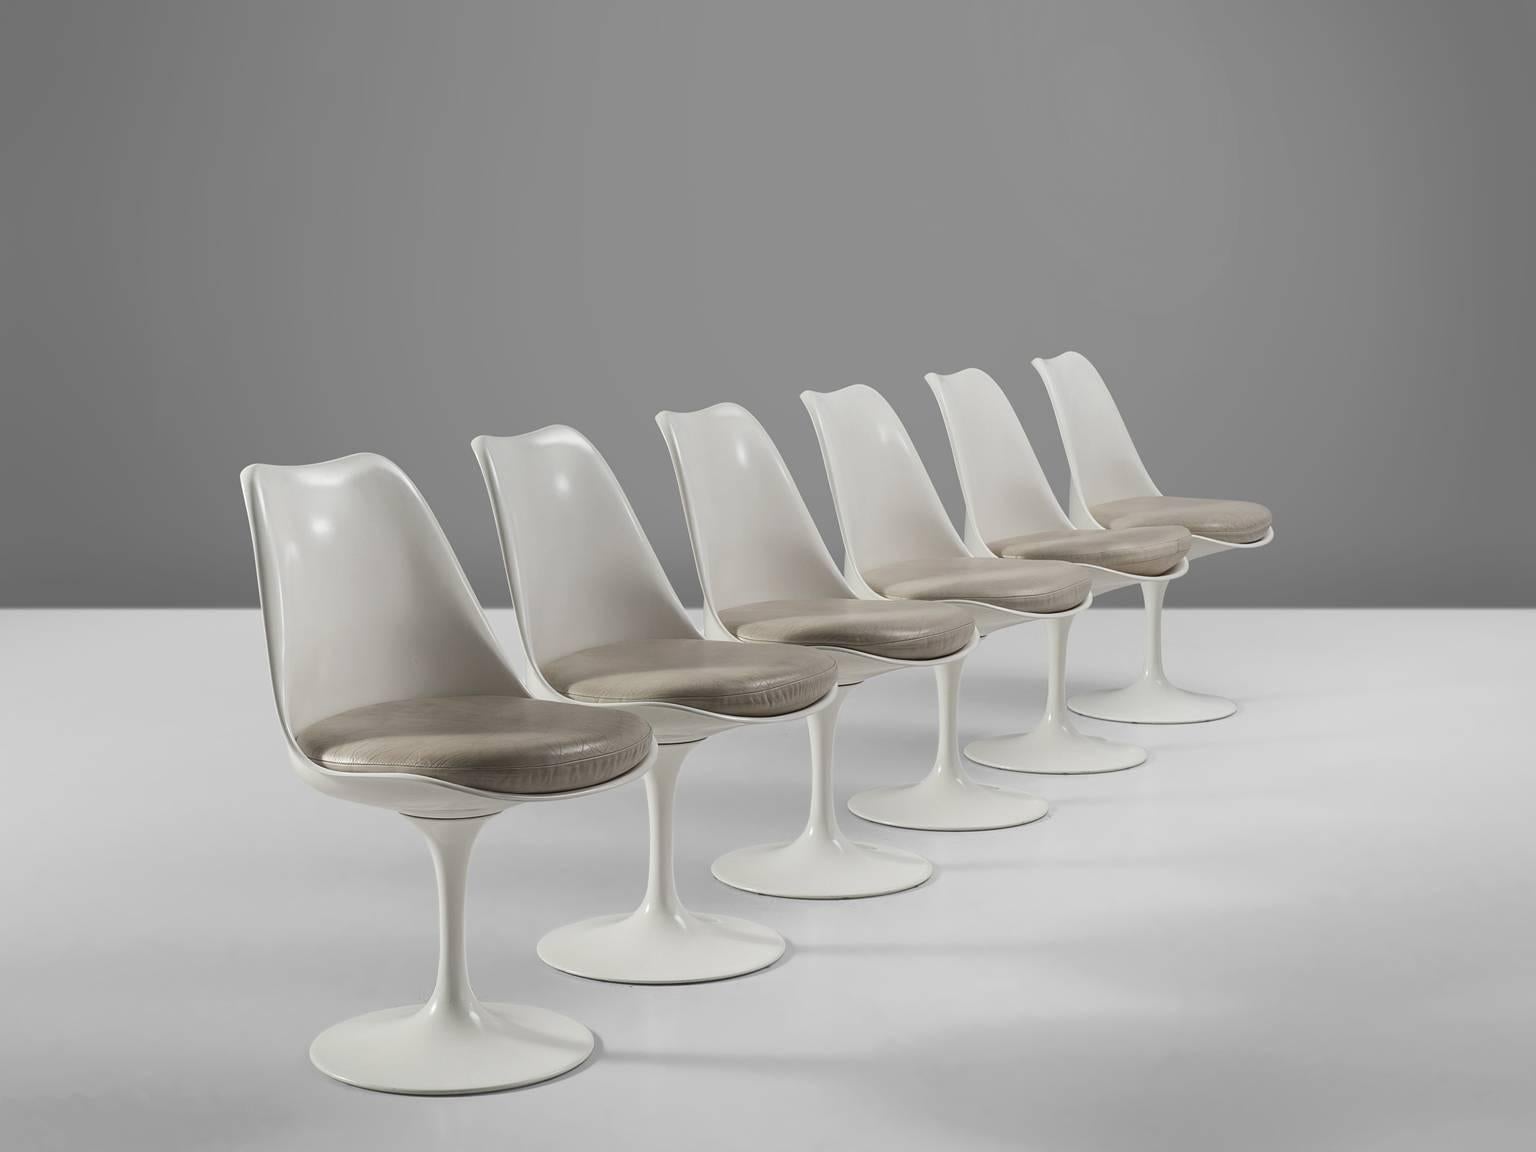 Set of six swivel dining chairs, in white metal, leather, fibre glass, by Eero Saarinen for Knoll International, United States, design 1958, production 1960s.

These six chairs with leathers seats are from the Tulip collection and were designed by